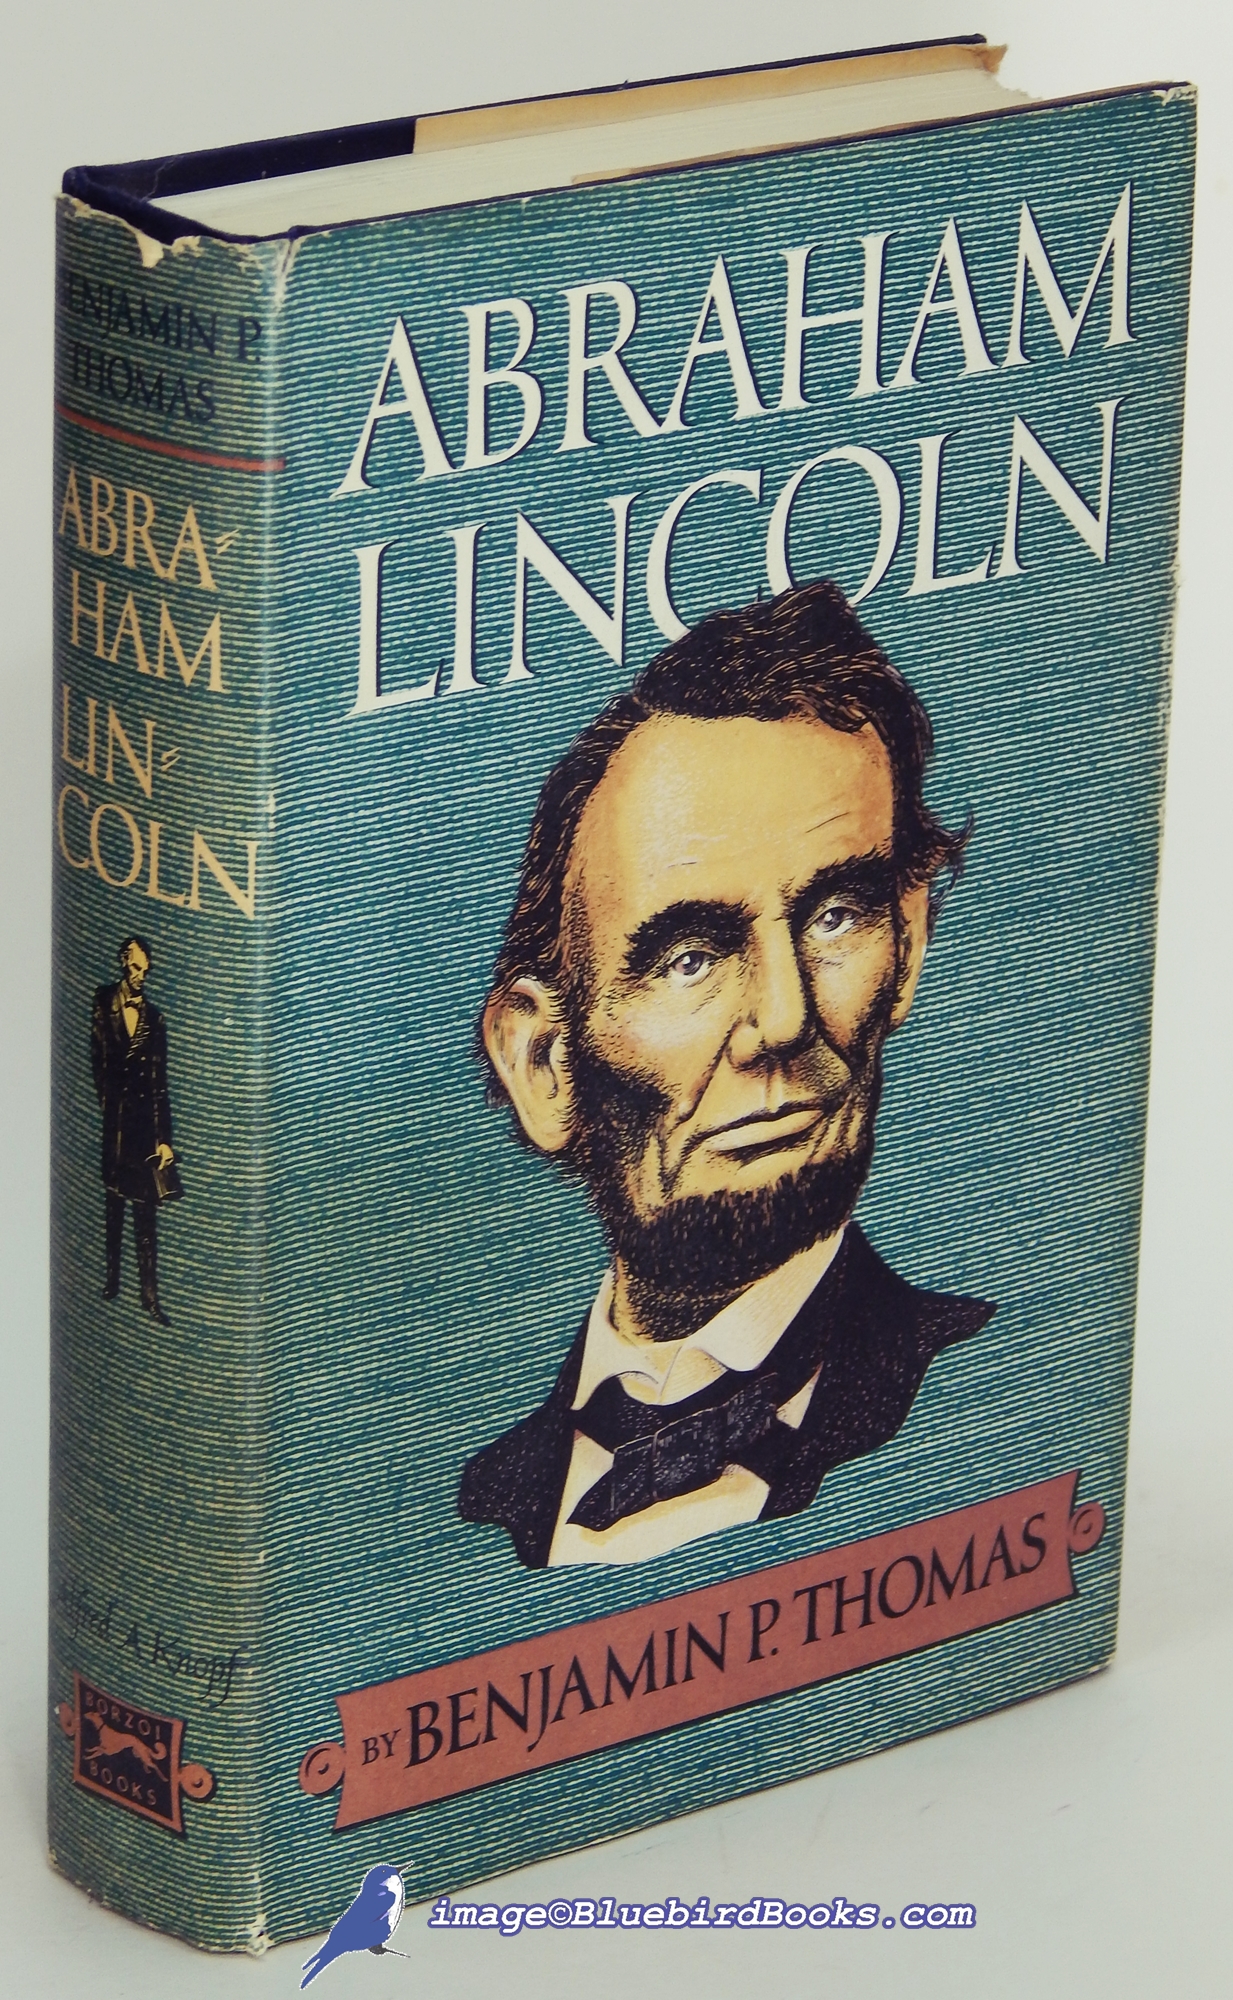 The Life of Lincoln by Ward H. Lamon.